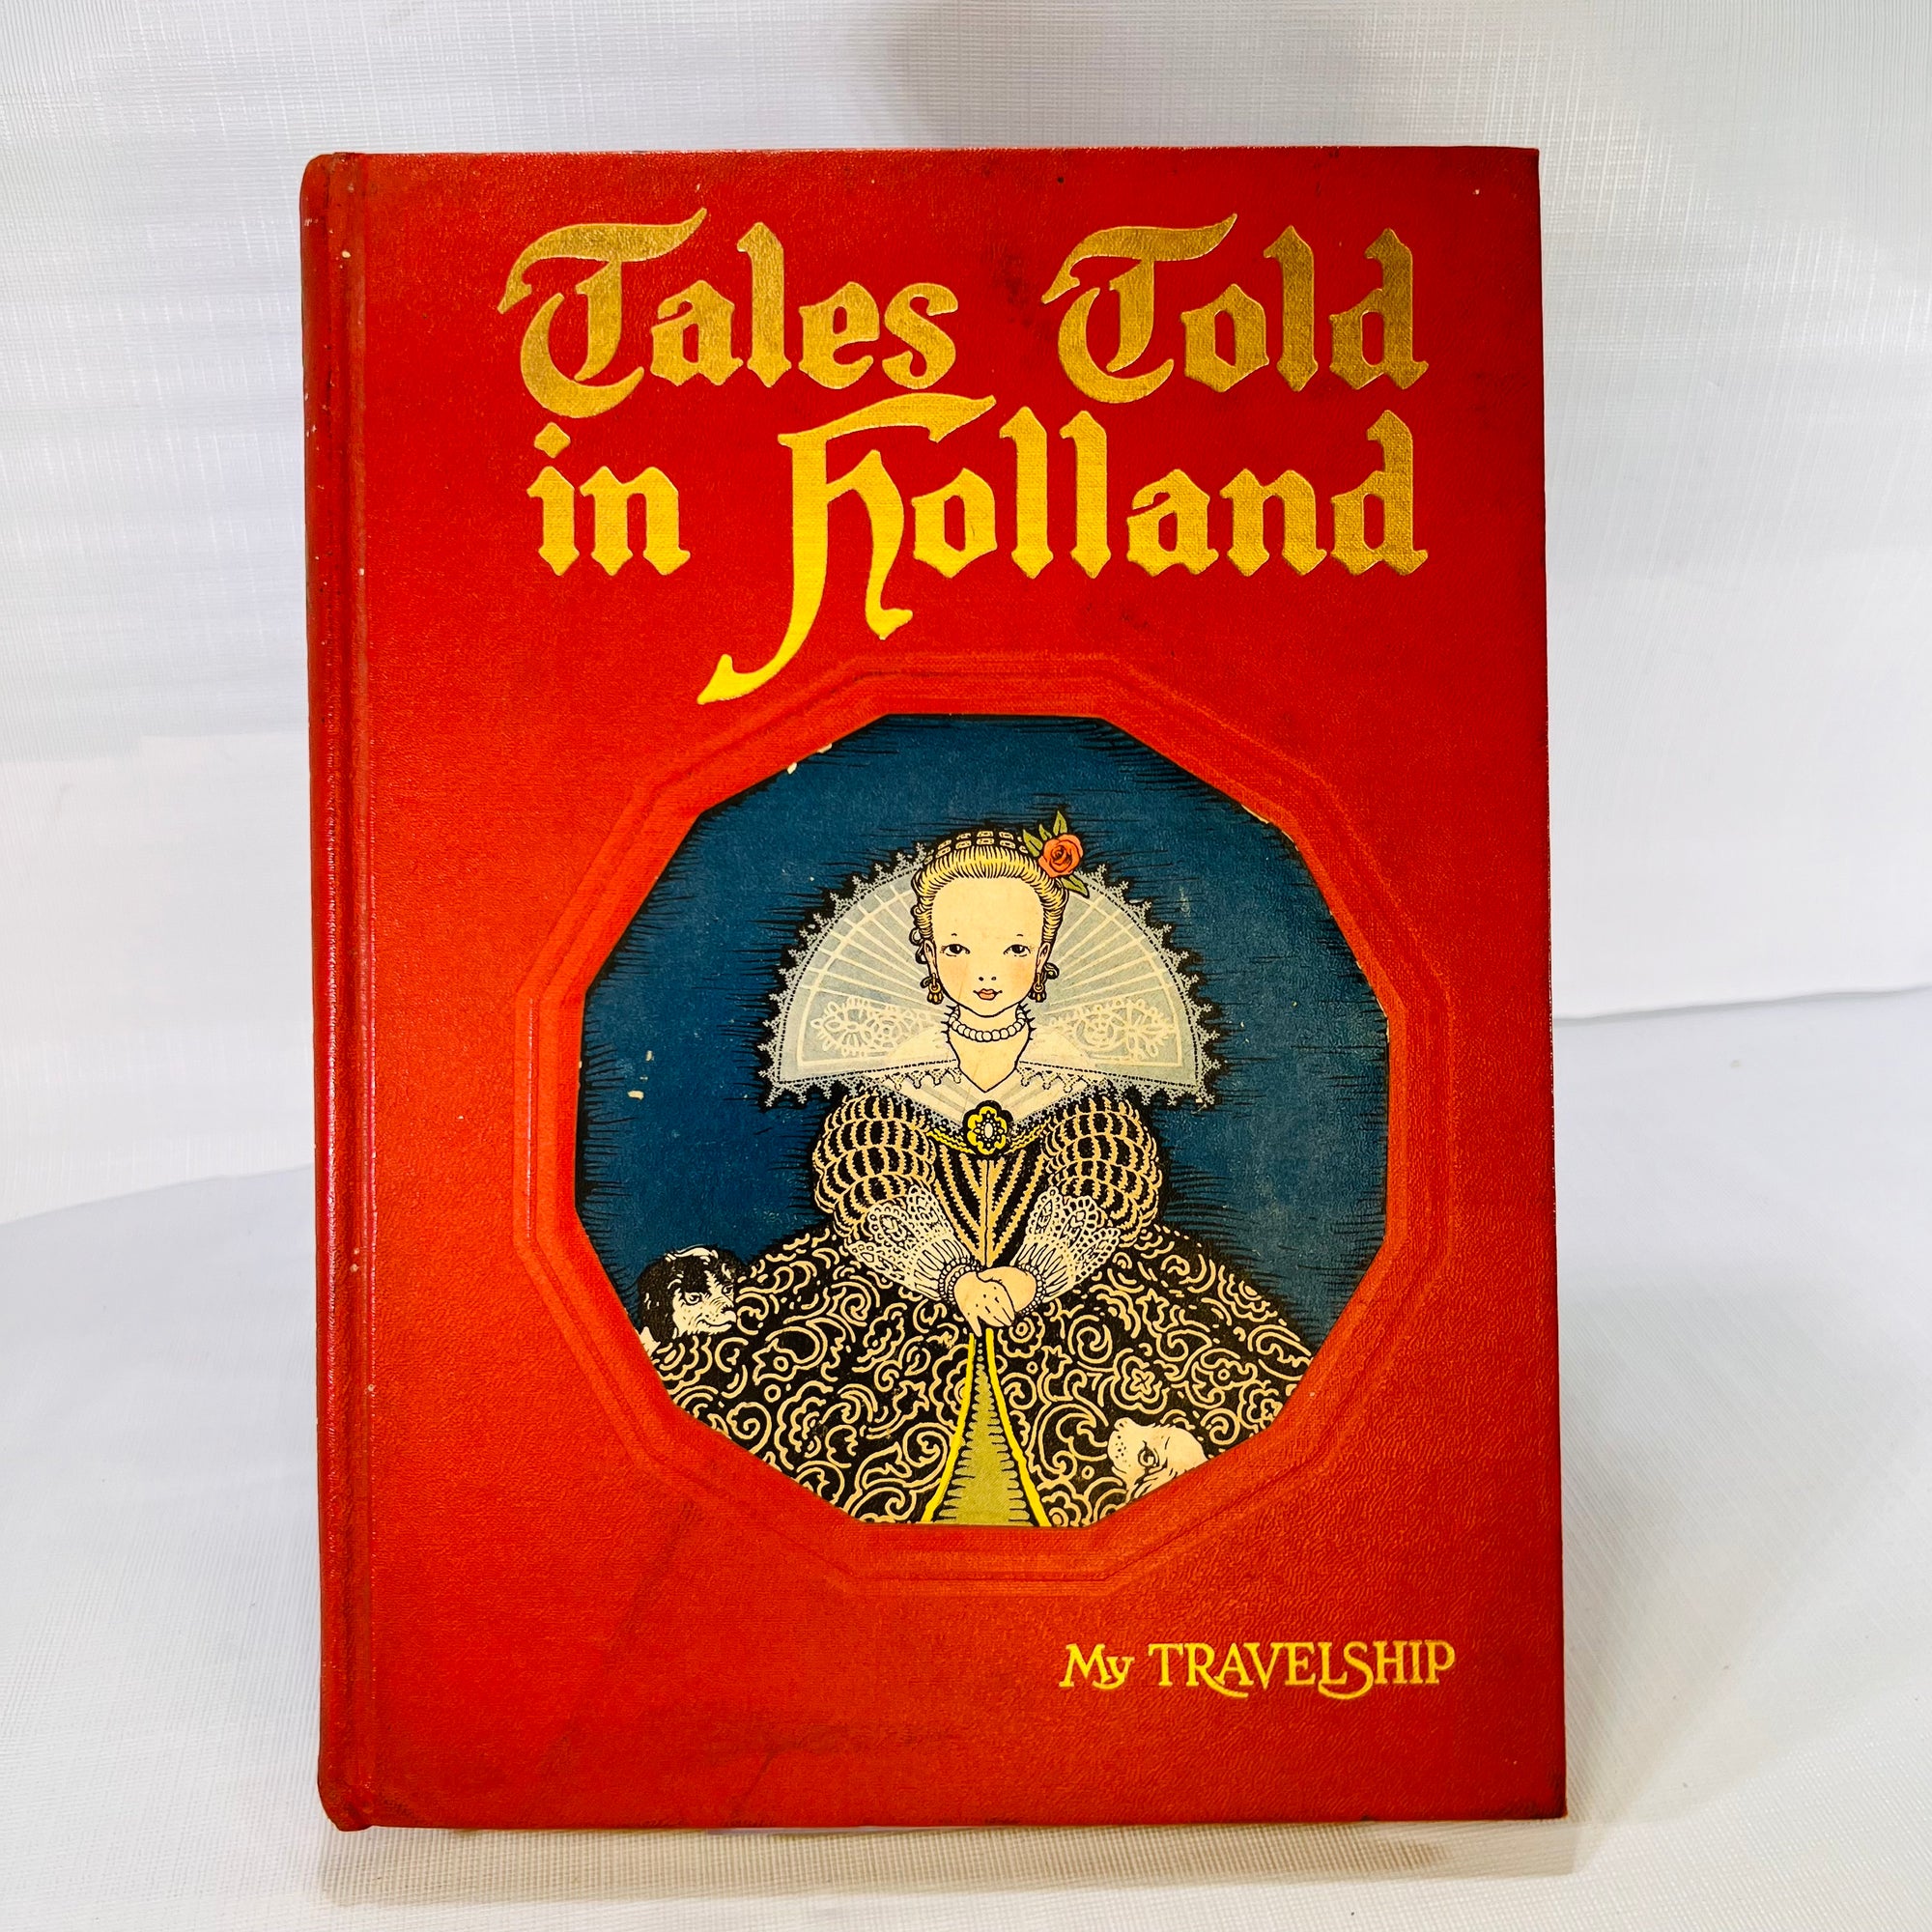 Tales Told in Holland edited by Olive Beaupre Miller illustrated by Maud & Miska Petersham a My Travel Ship The Bookhouse for Children